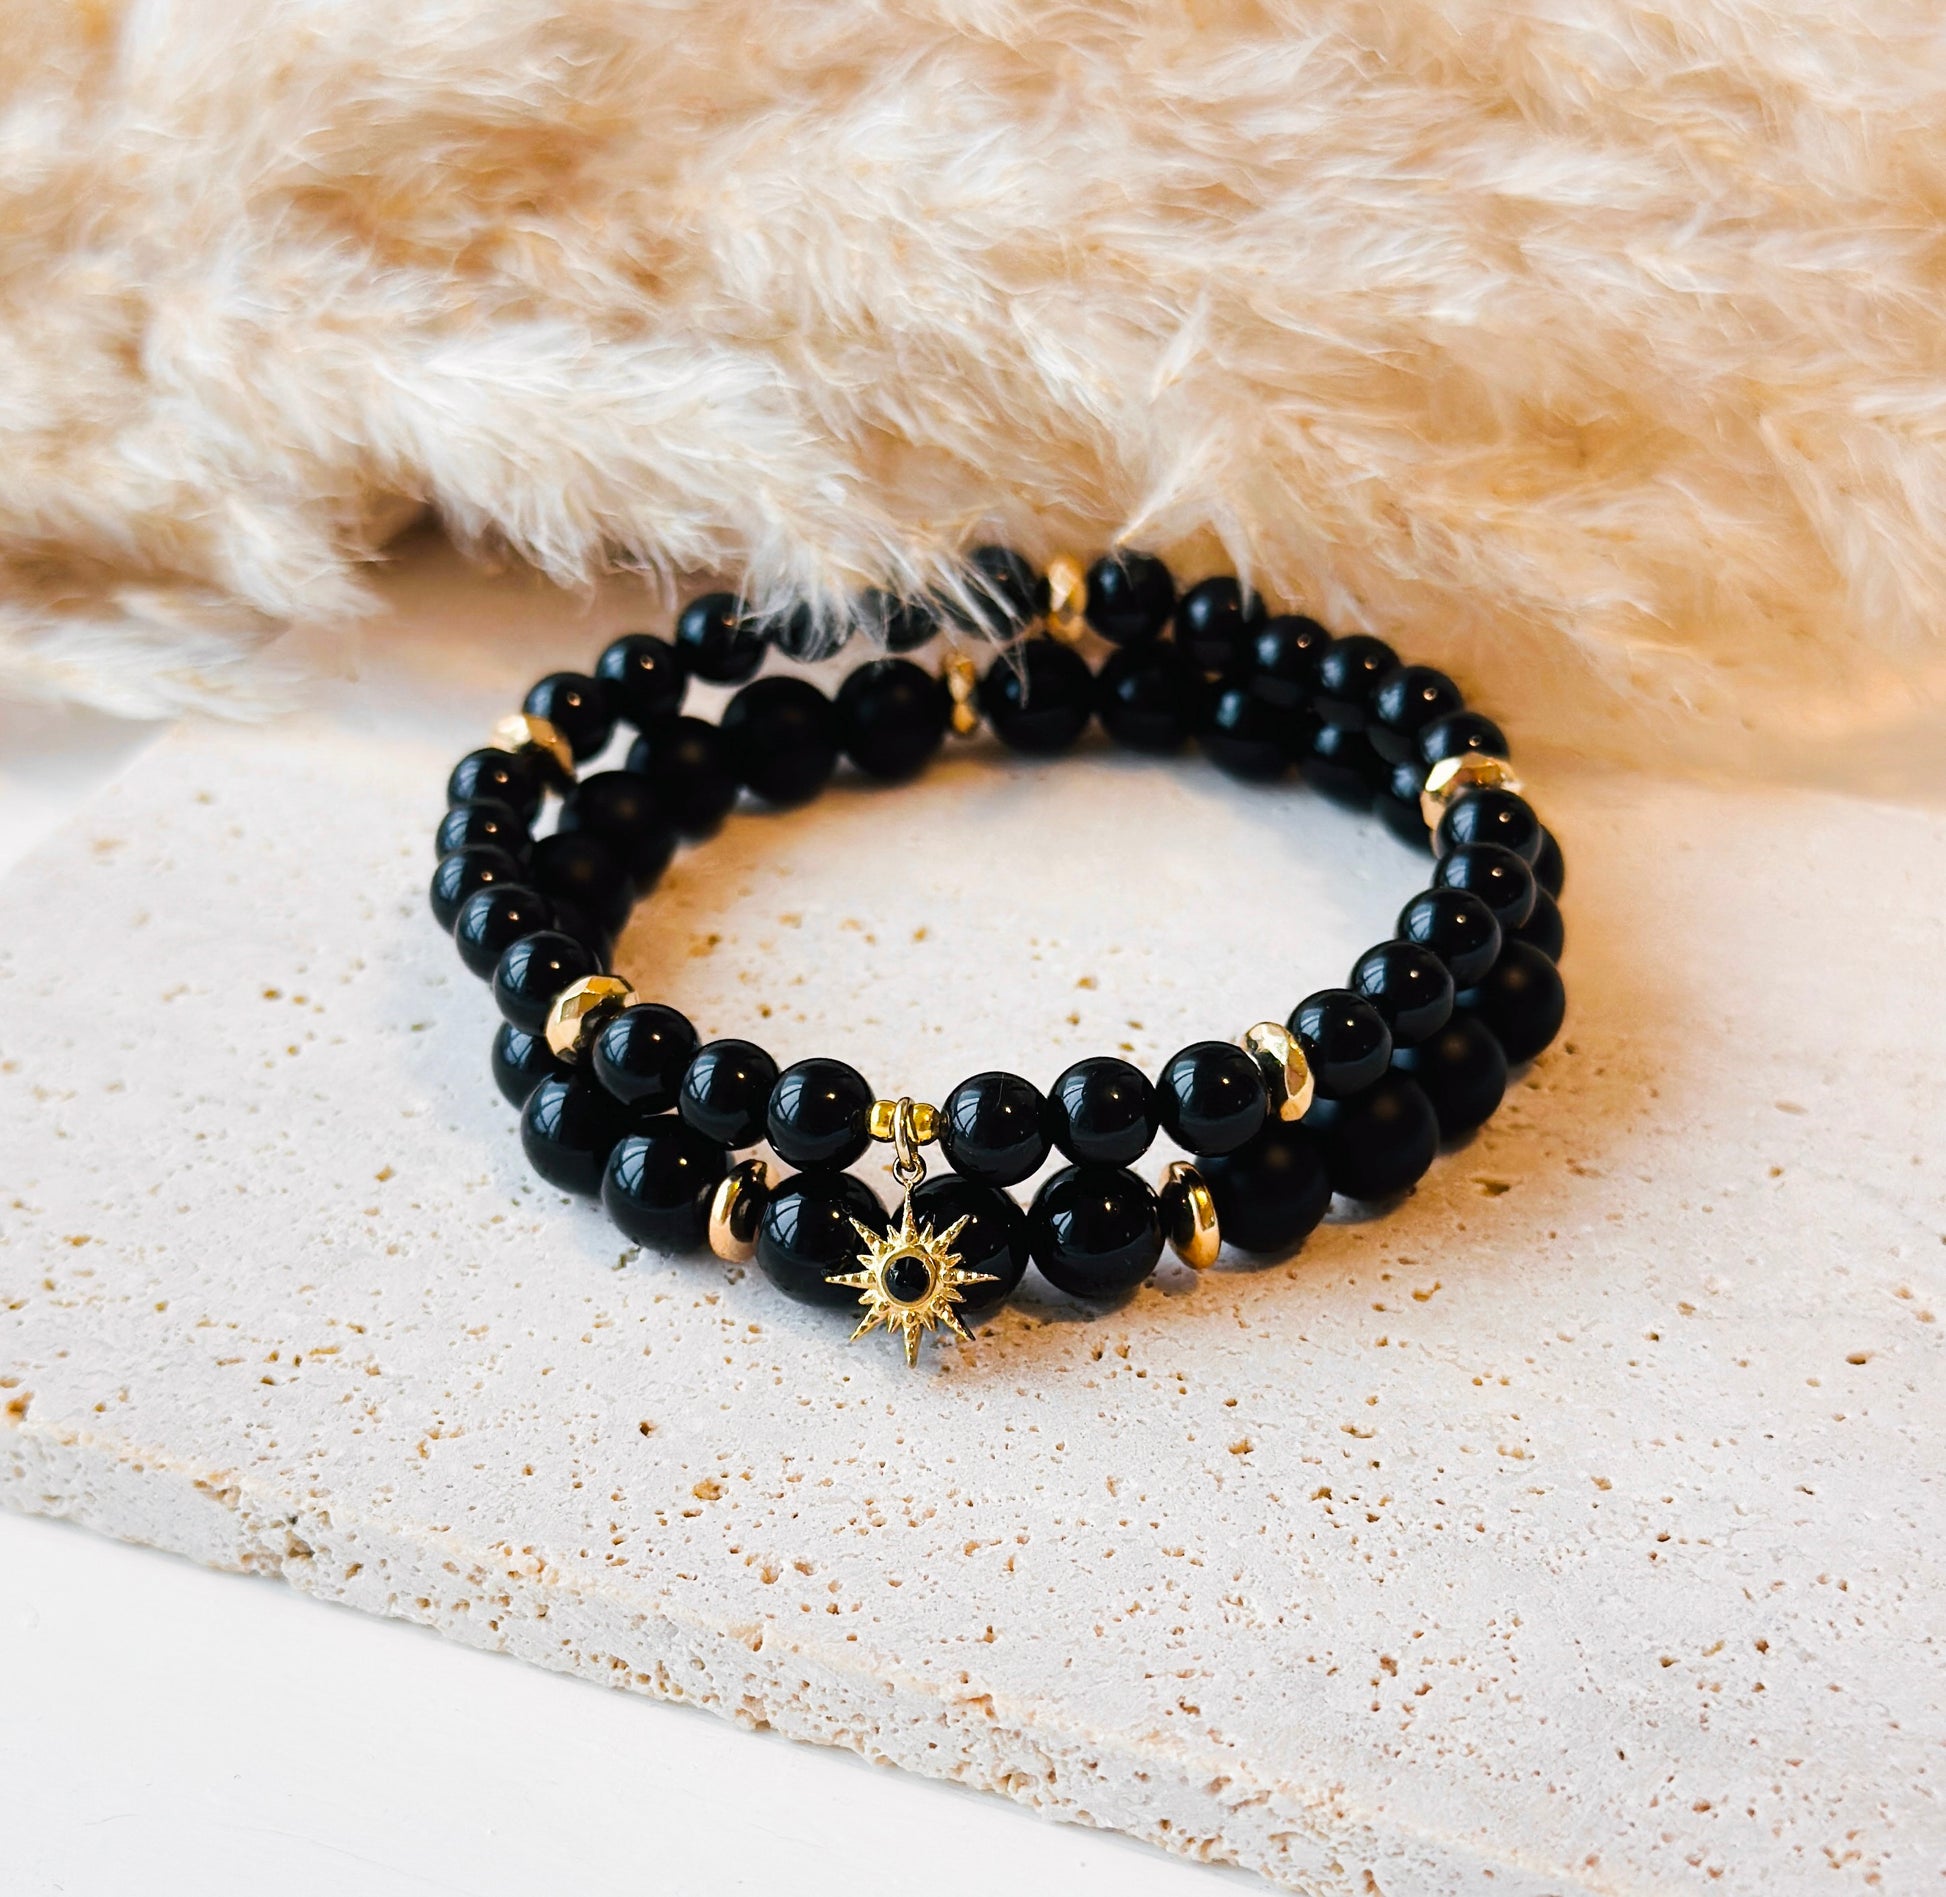  limited edition gemstone bracelet set, meticulously crafted with a striking combination of shiny and matte Onyx, adorned with a celestial touch—a gold star charm with an onyx gemstone center.